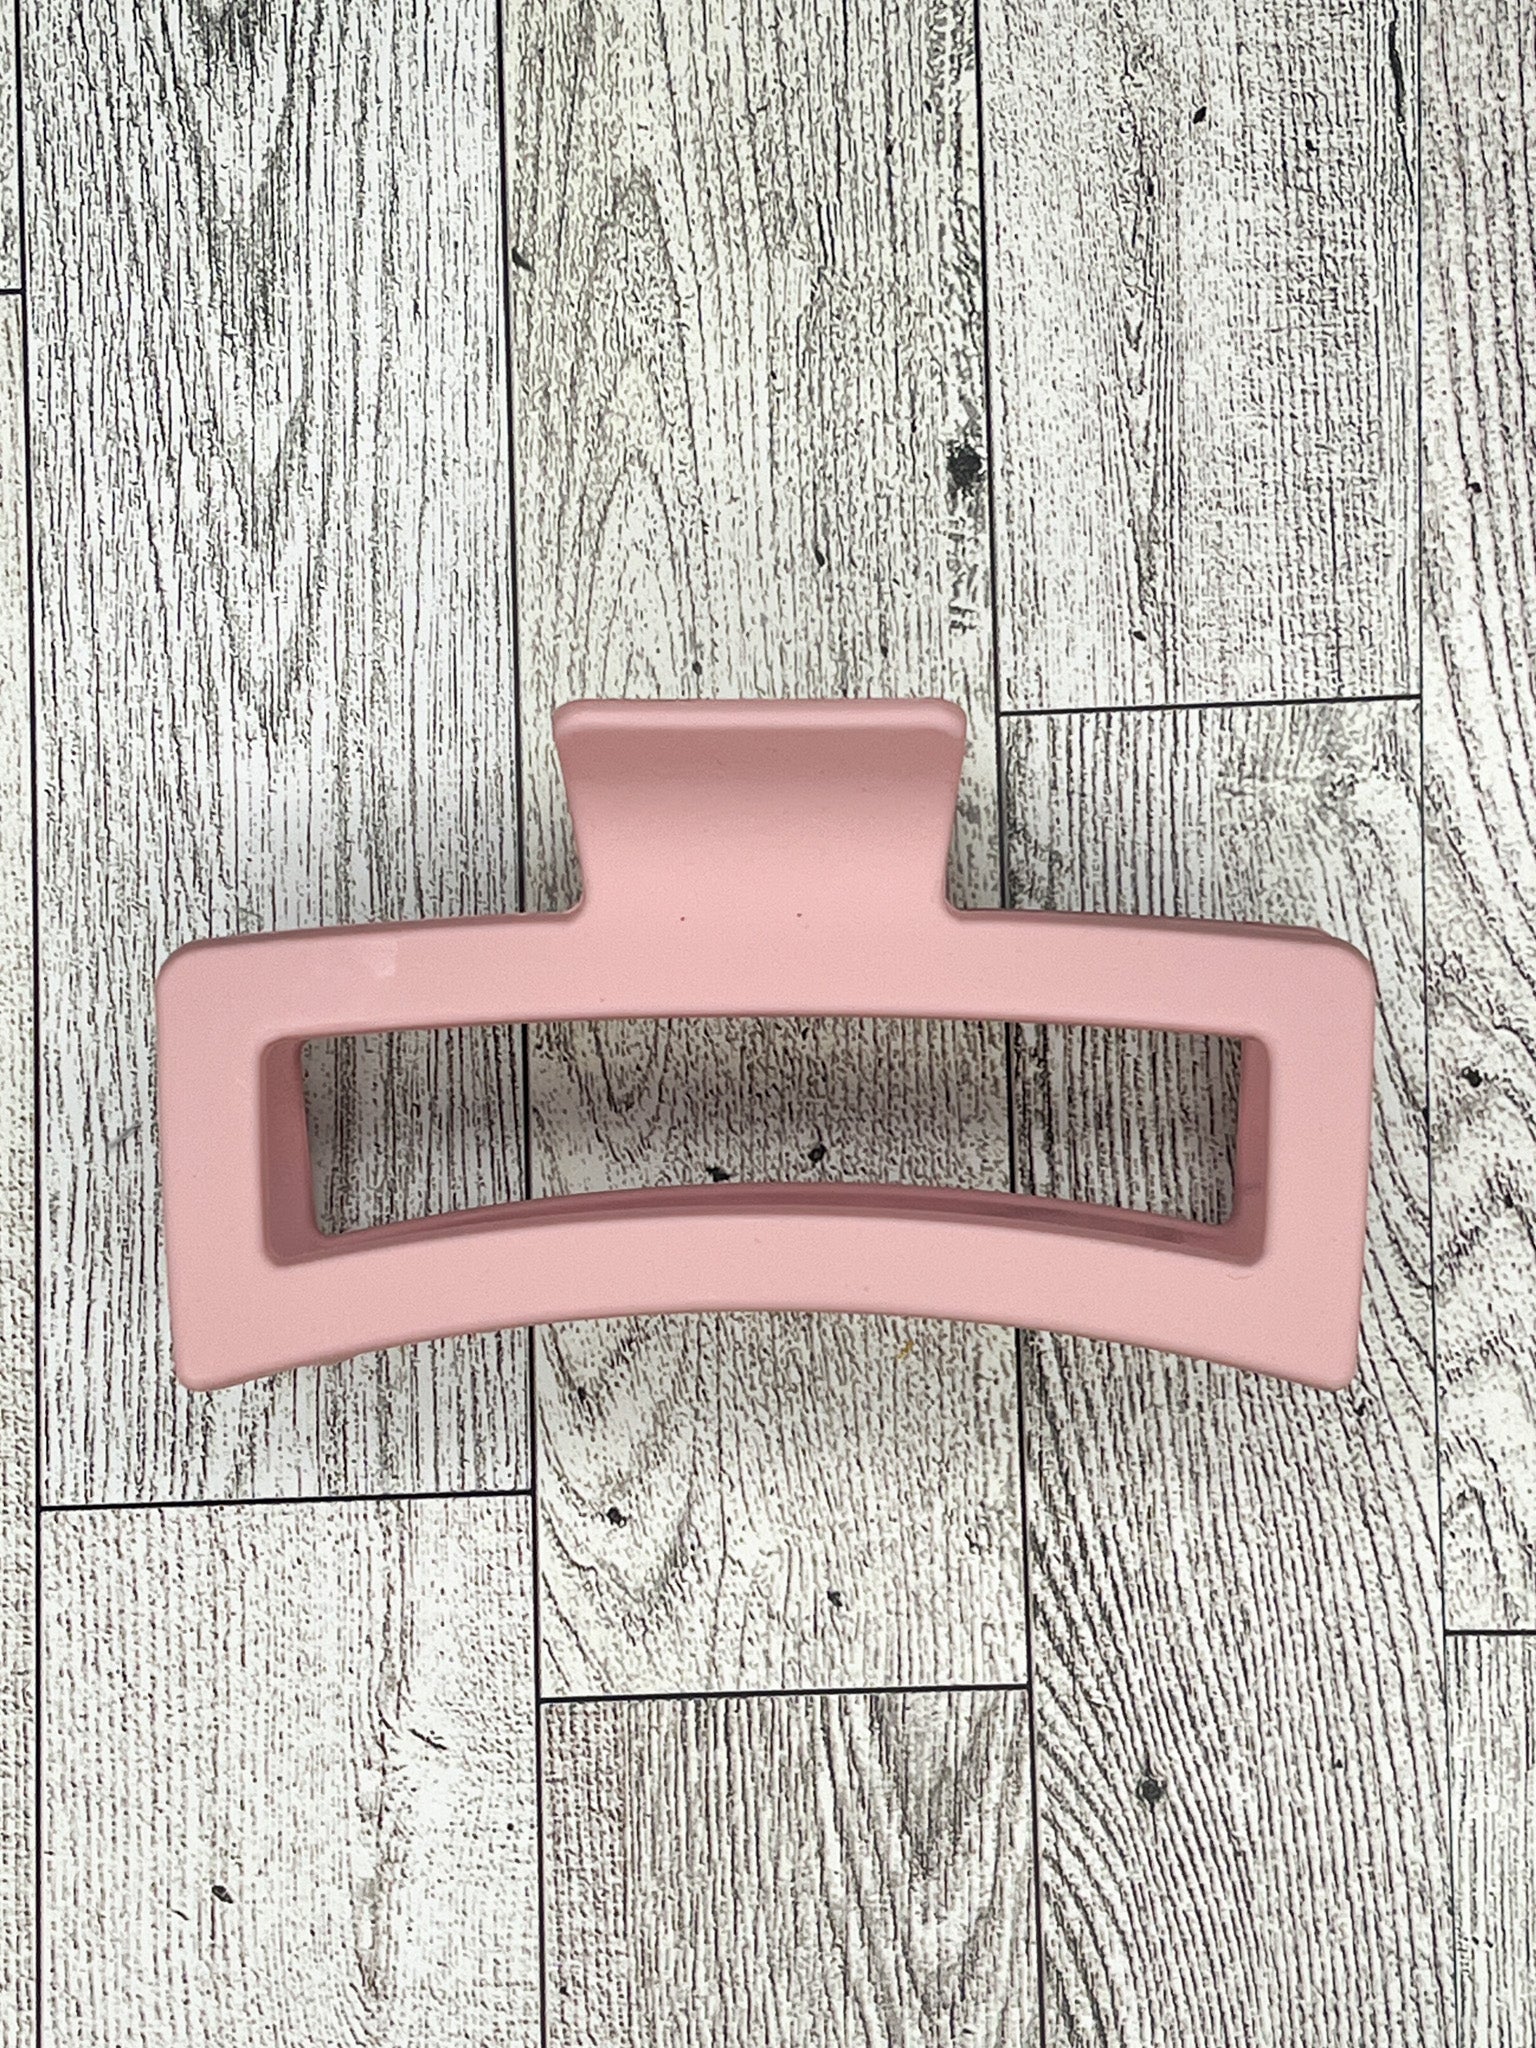 Matte Blush Pink Claw Clip - Classic Shape - 5 inches in length. Great for Braids, twists, long hair, thick hair, and coarse hair.